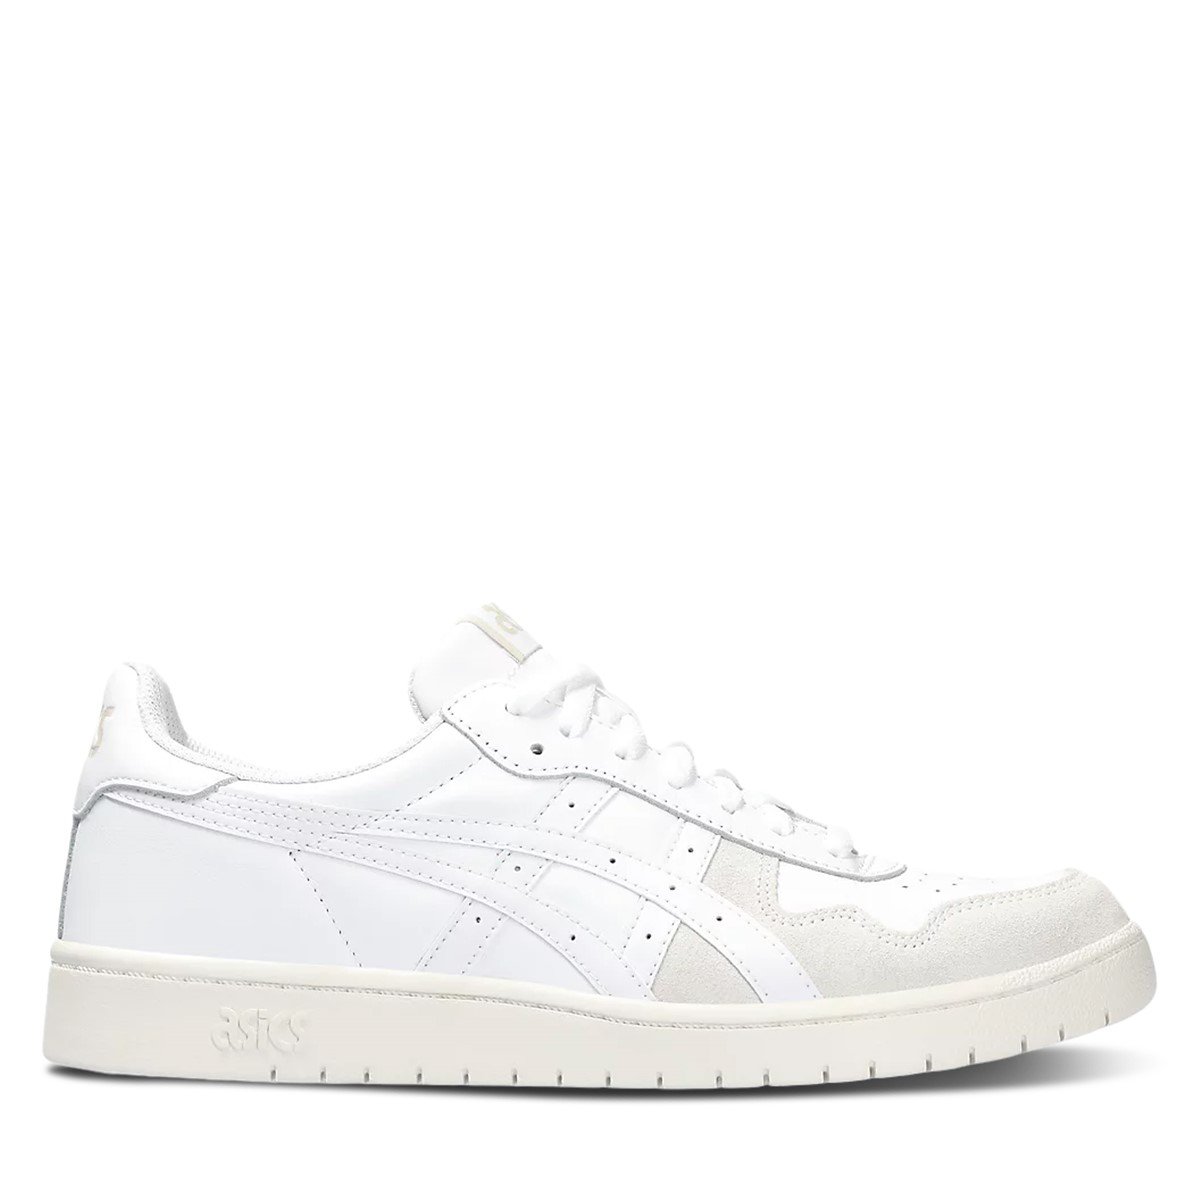 Baskets Japan S blanches pour hommes